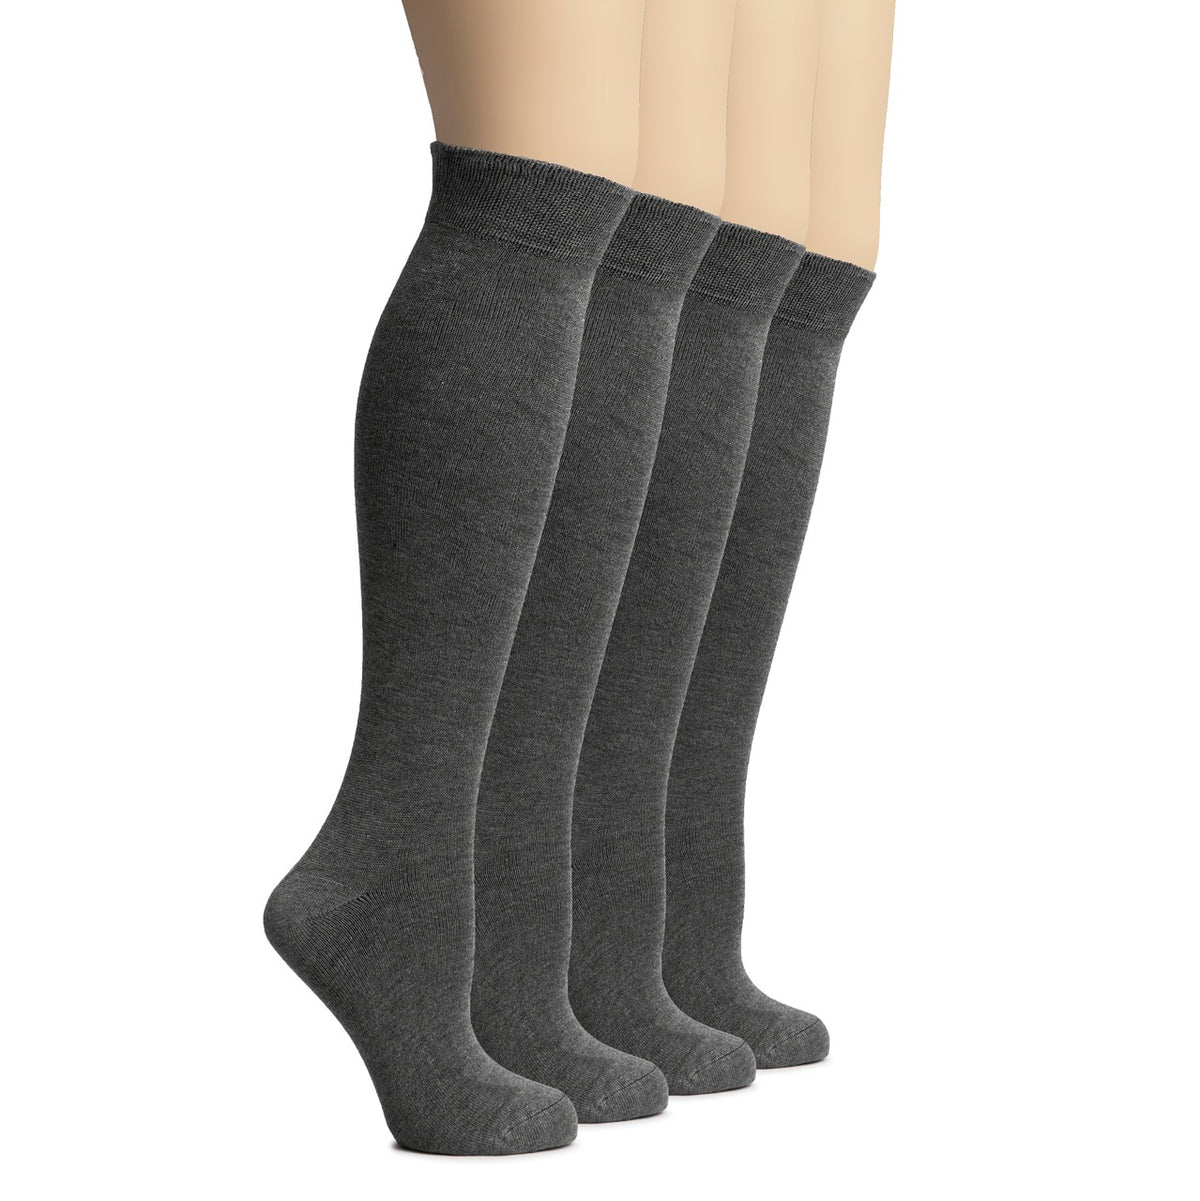 Get the perfect blend of comfort, style, and health with these 3 pairs of women's dark gray knee high socks. Made from soft and breathable bamboo fabric, they provide a seamless fit and support for your feet. Plus, the non-binding top improves circulation and prevents irritation. - Hugh Ugoli